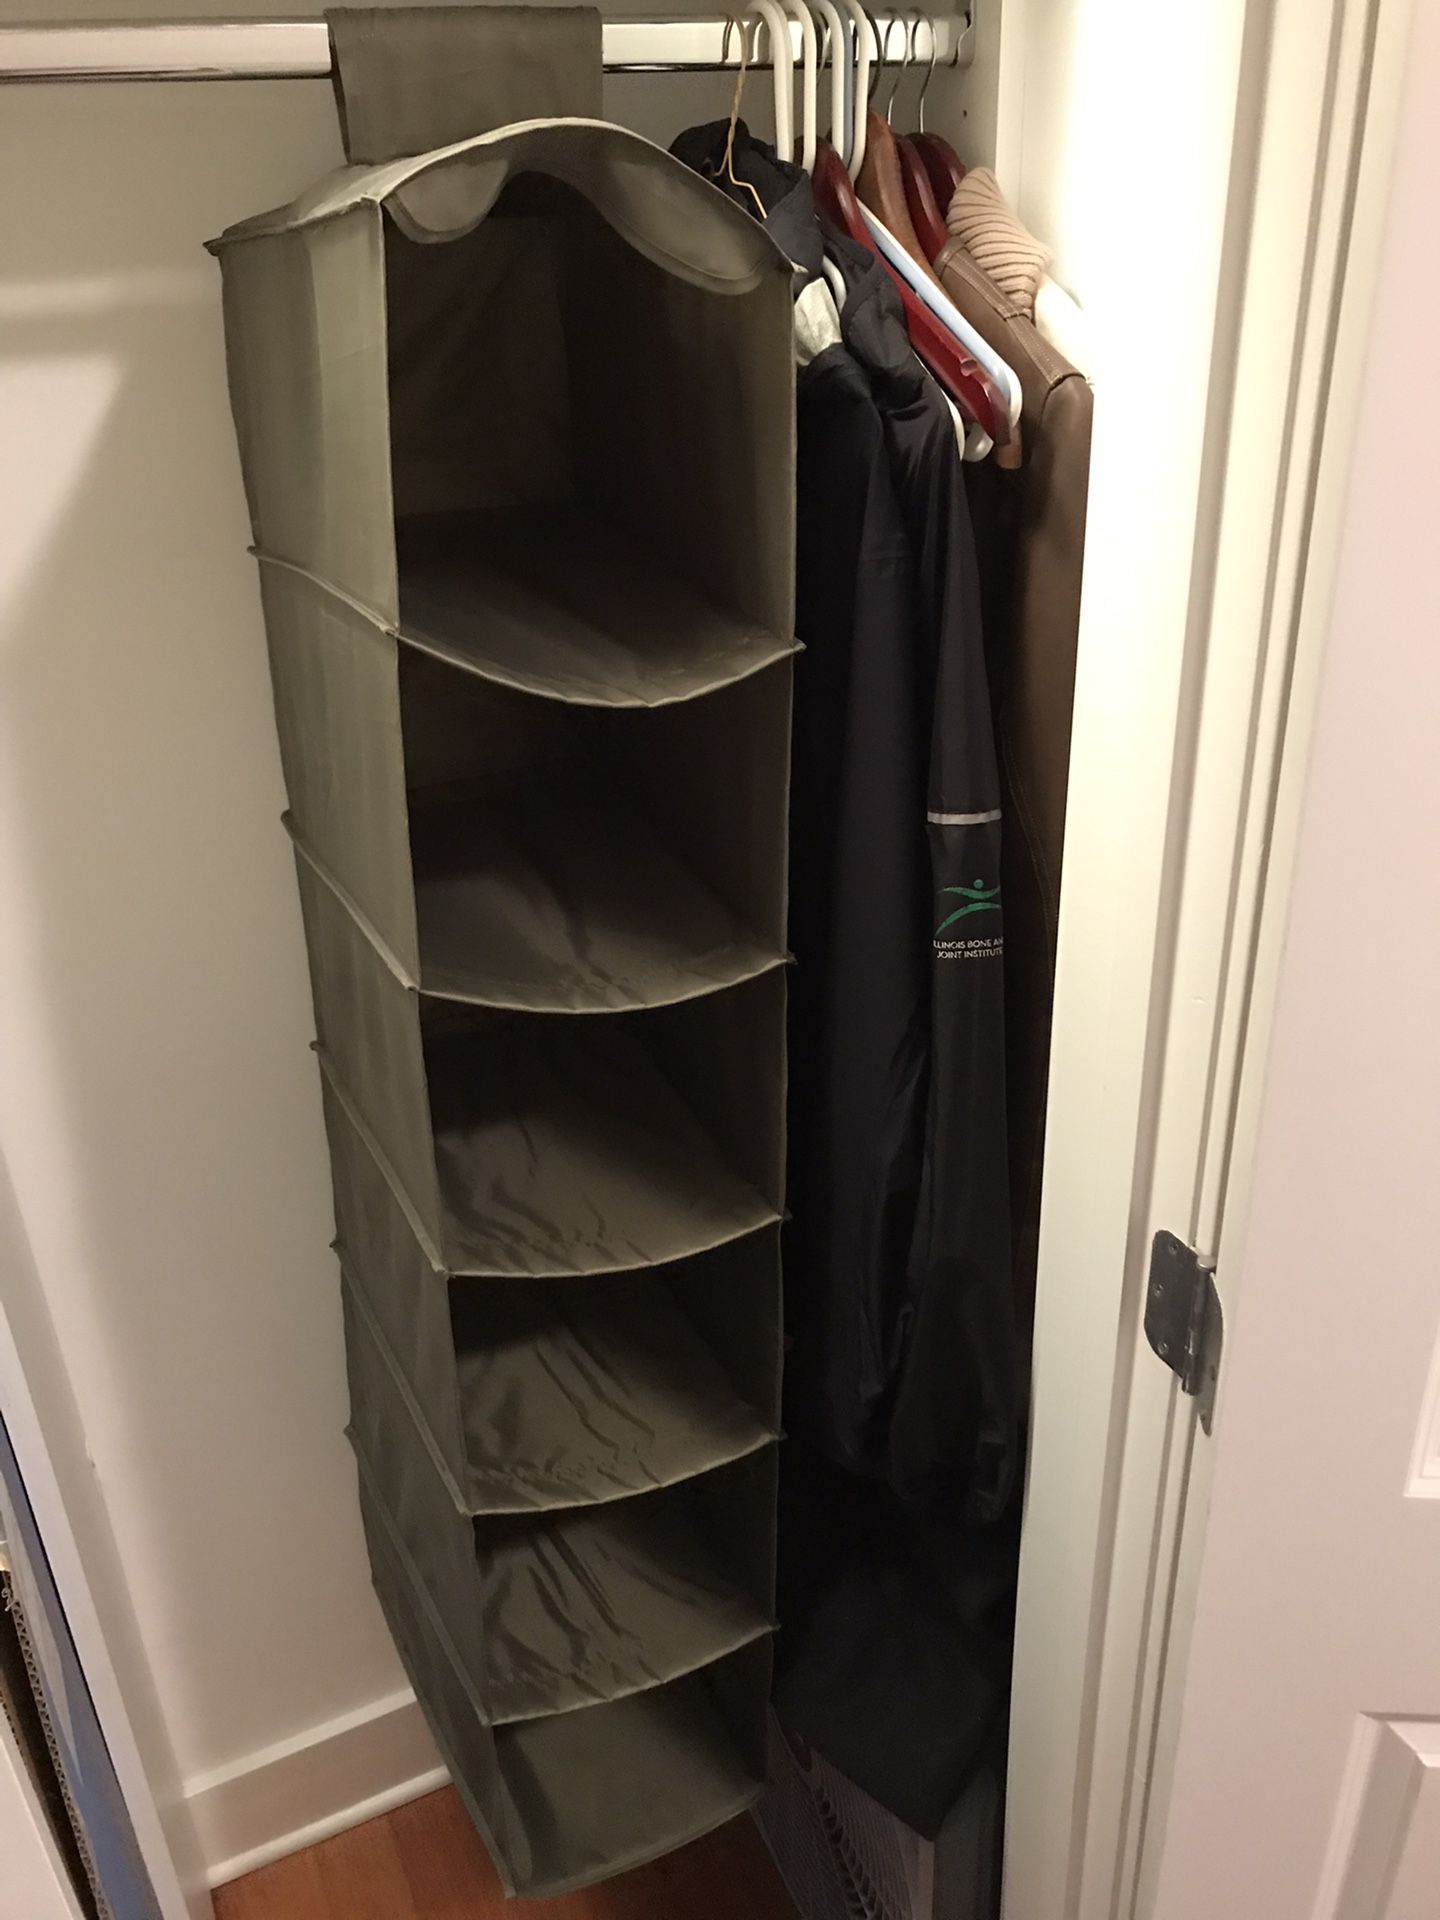 Olive Green Closet Organizer Collapsable Storage Compartments Bins Fabric Hanging